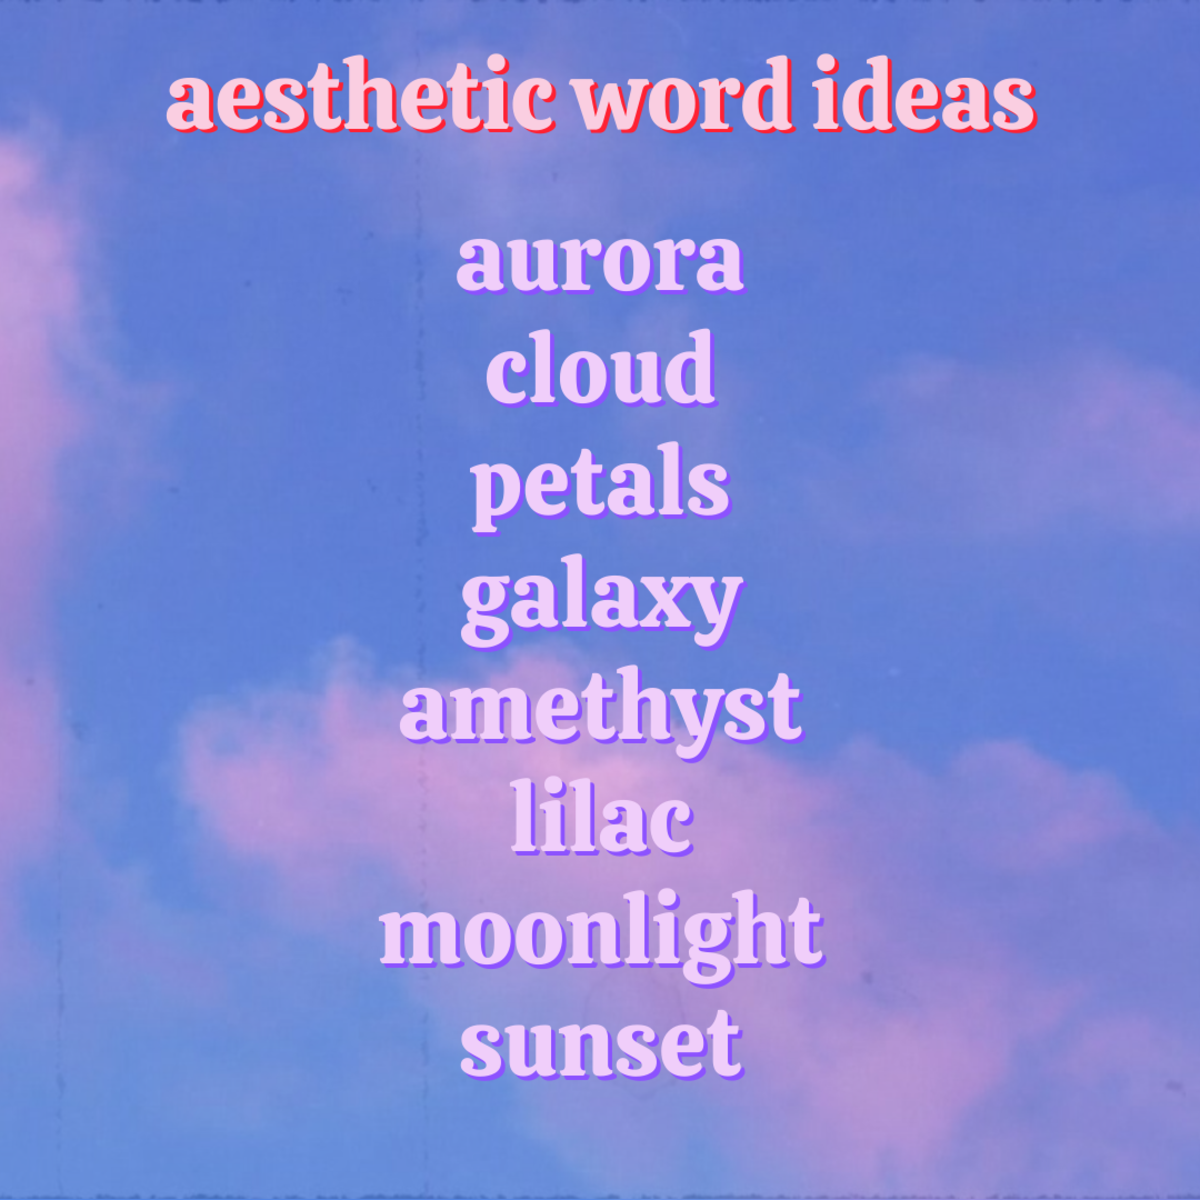 Here are some super aesthetic word ideas to help inspire you!